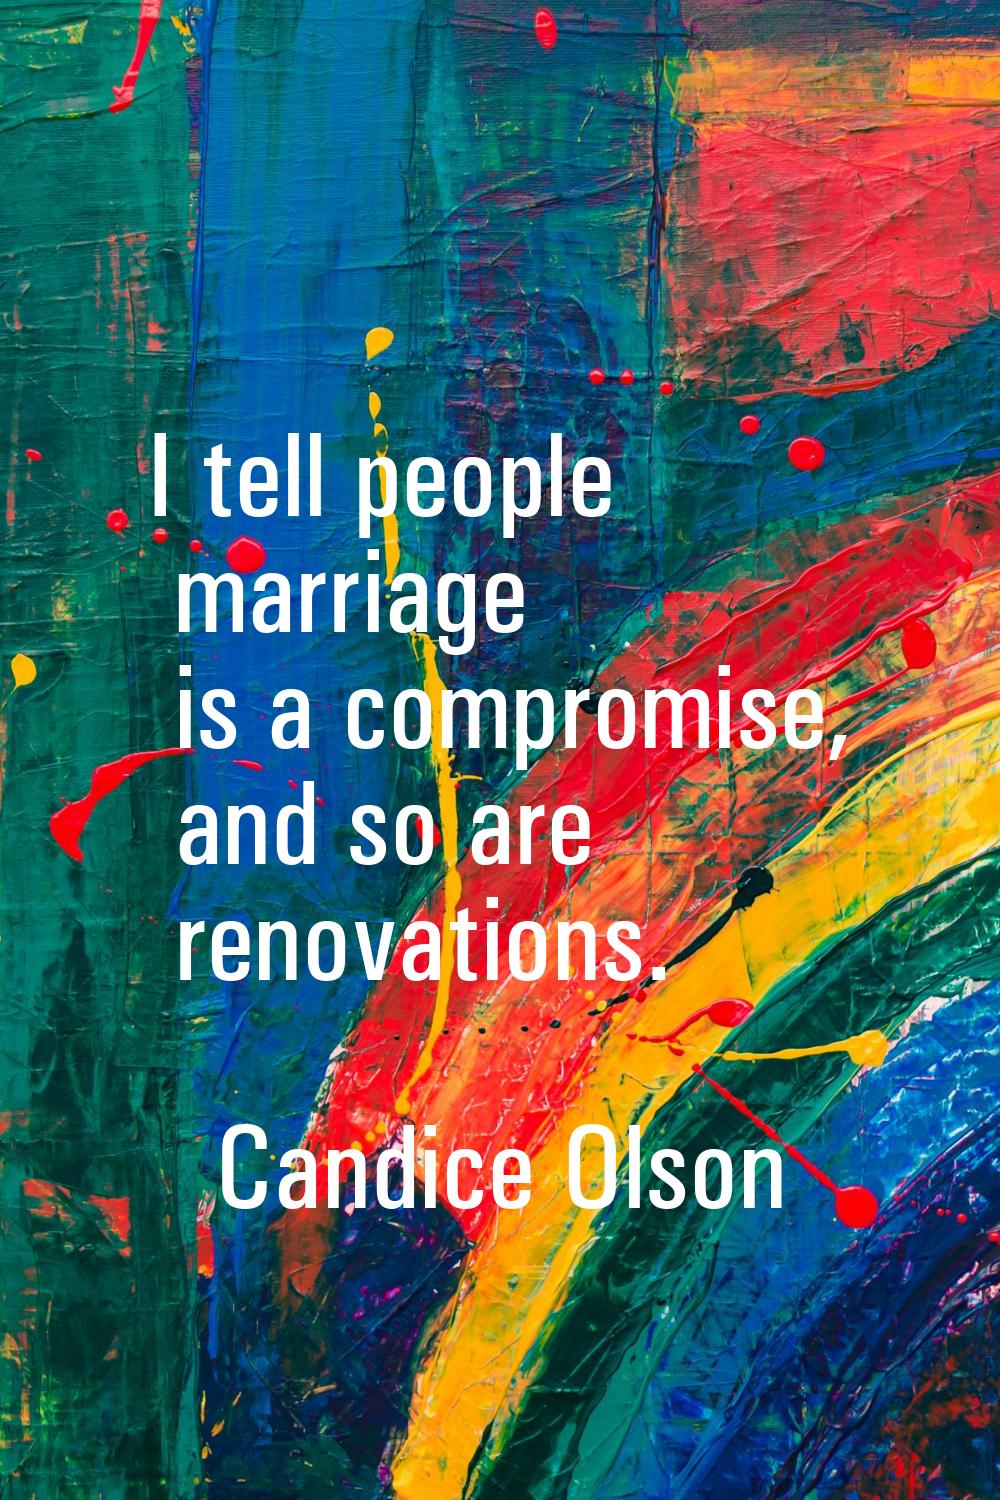 I tell people marriage is a compromise, and so are renovations.